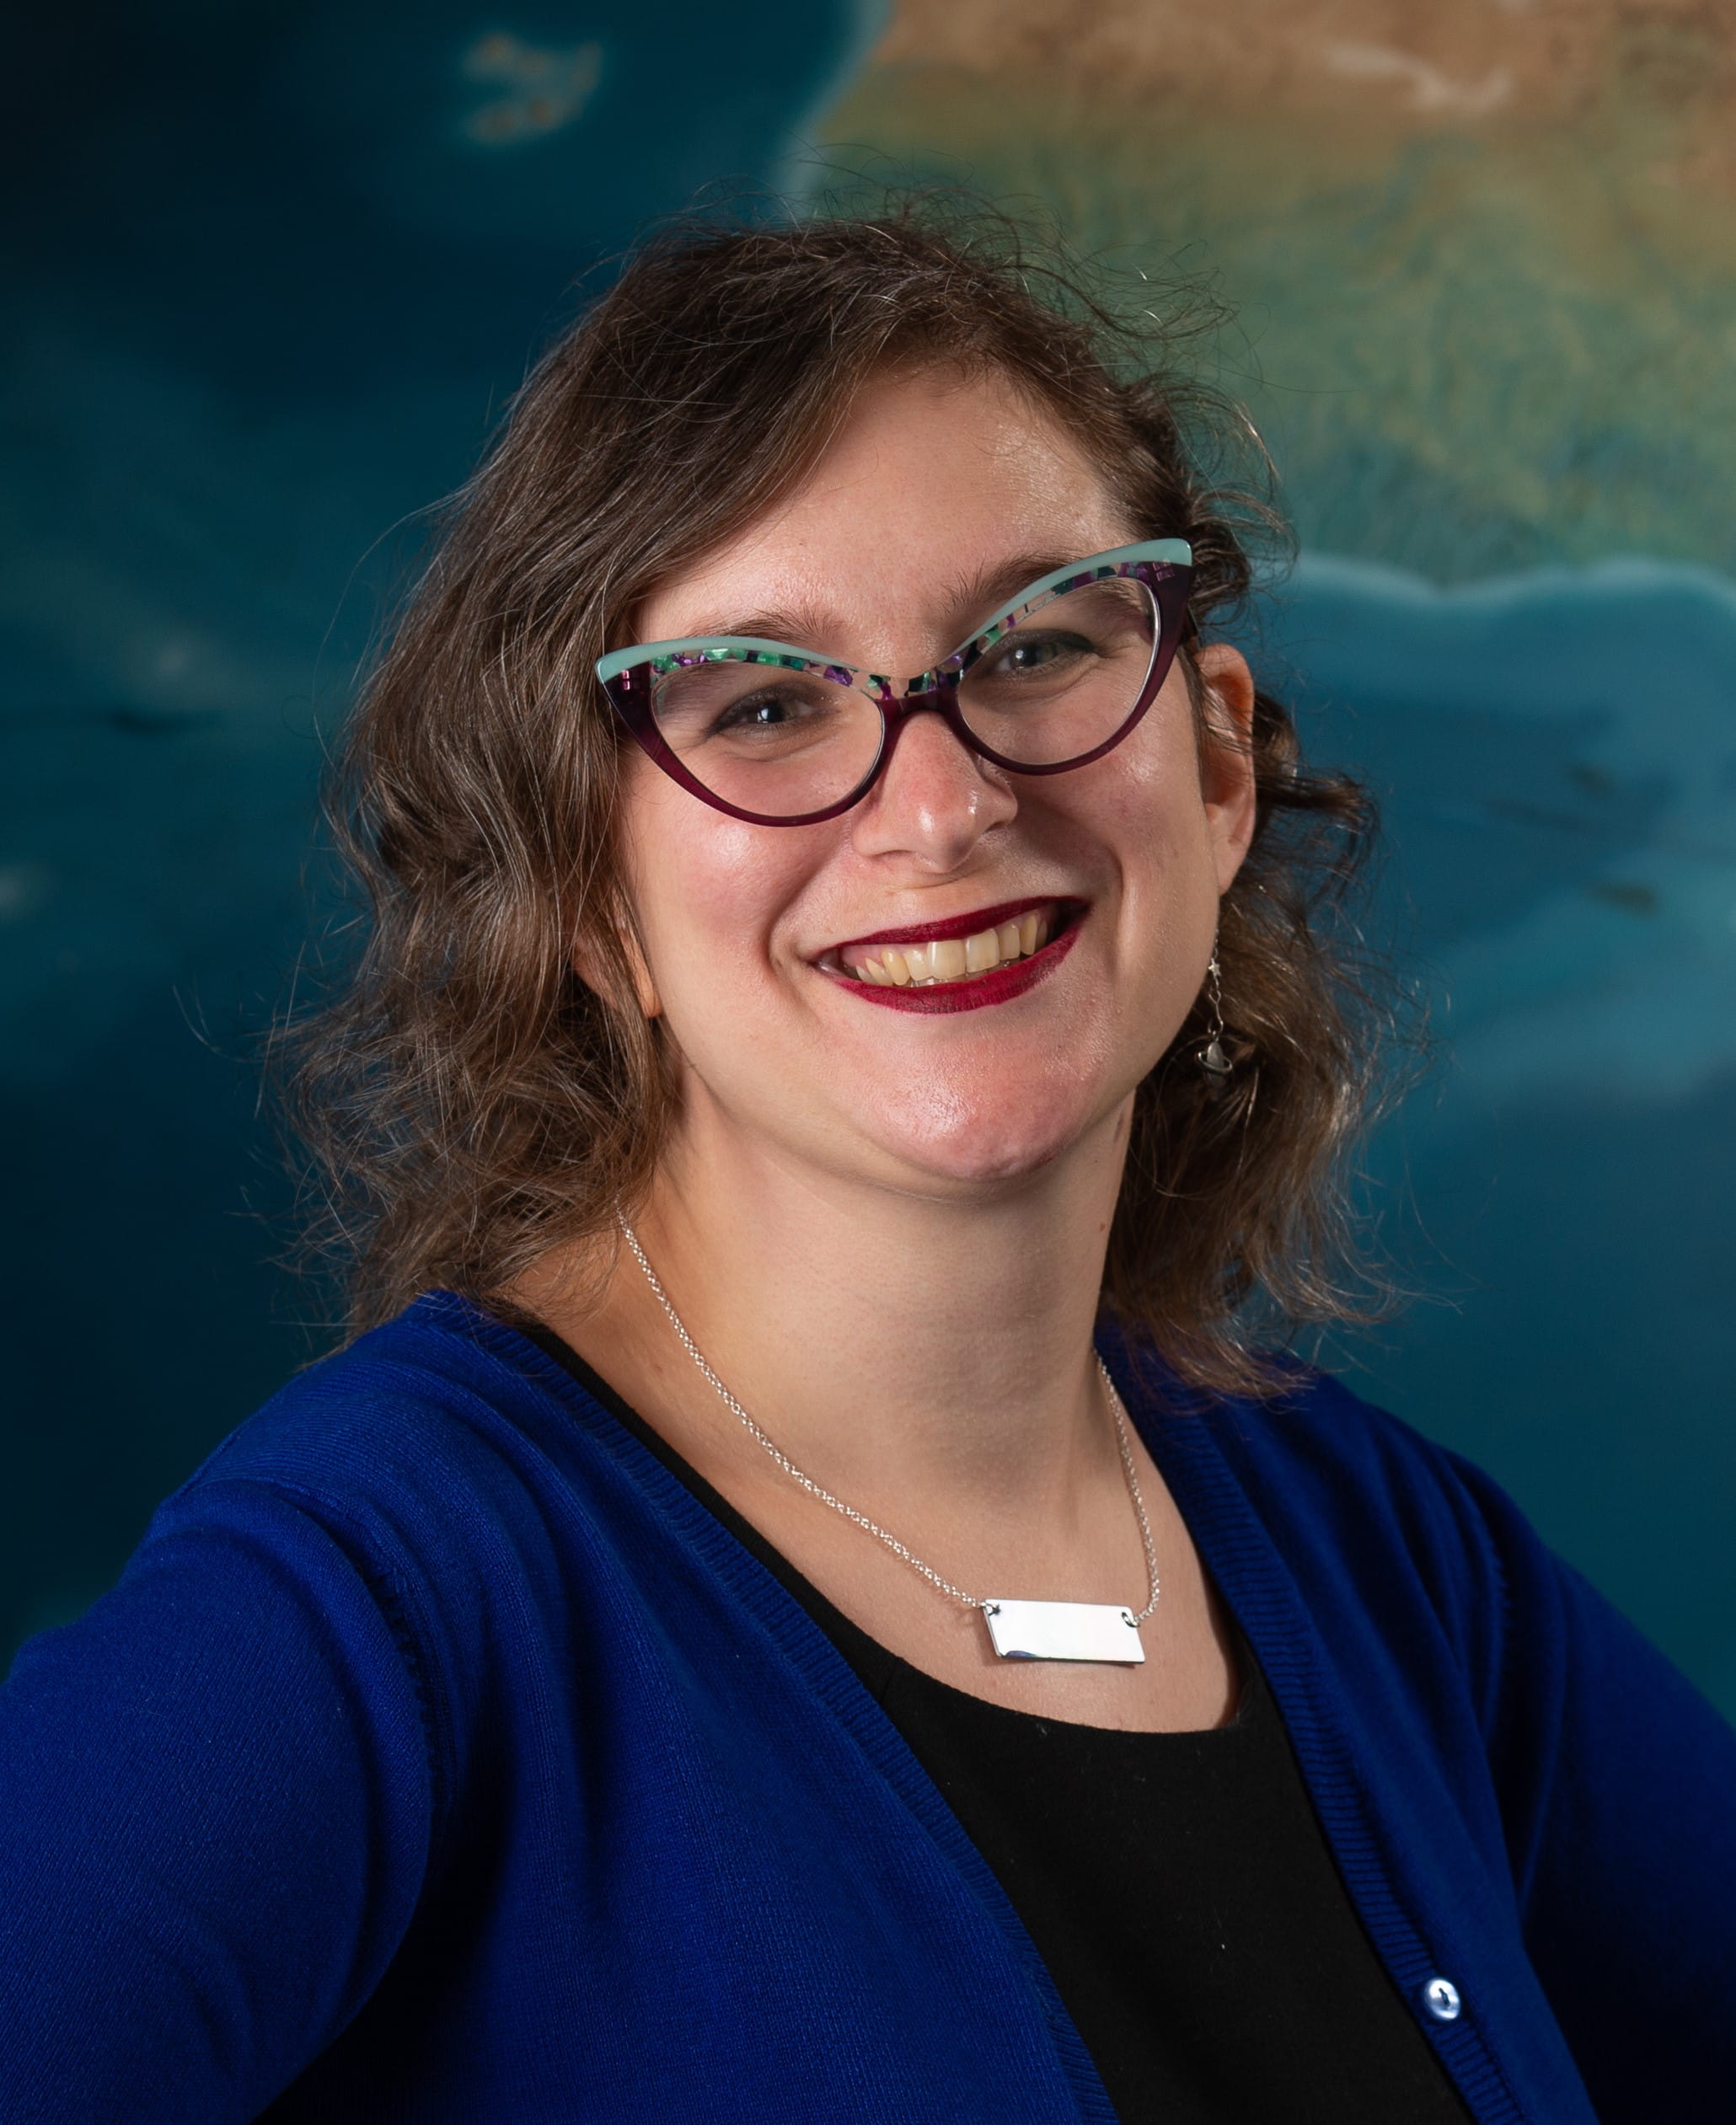 Shannon Schmoll, science and astronomy expert and director of the Abrams Planetarium at MSU. Courtesy photo